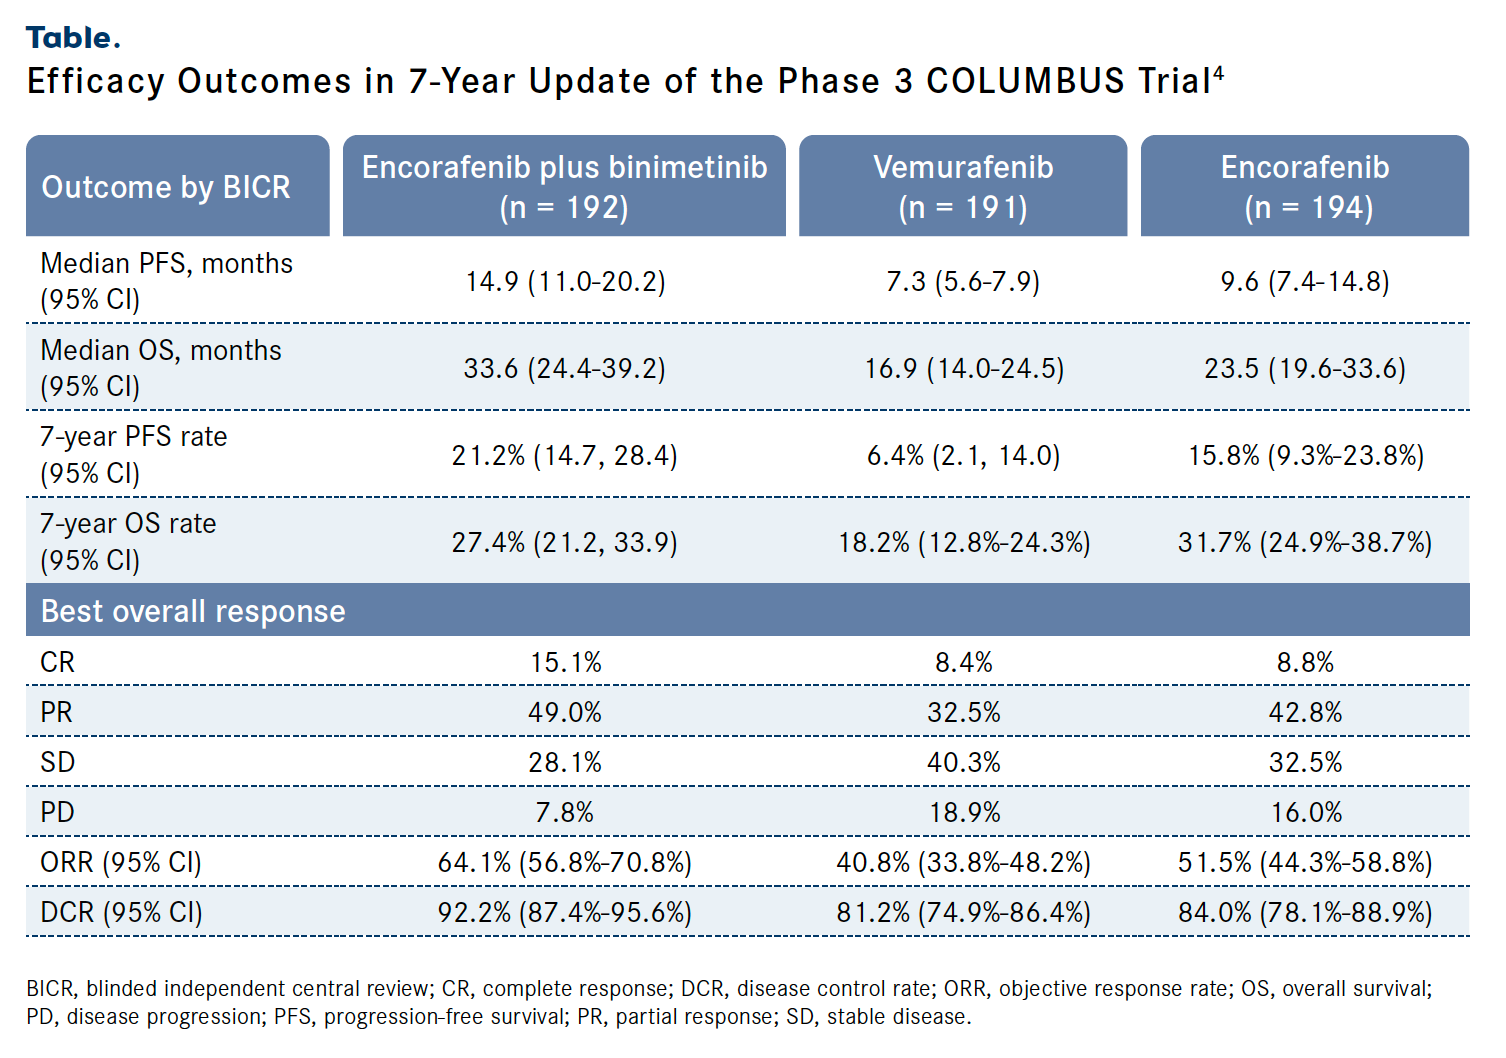 Table. Efficacy Outcomes in 7-Year Update of the Phase 3 COLUMBUS Trial4